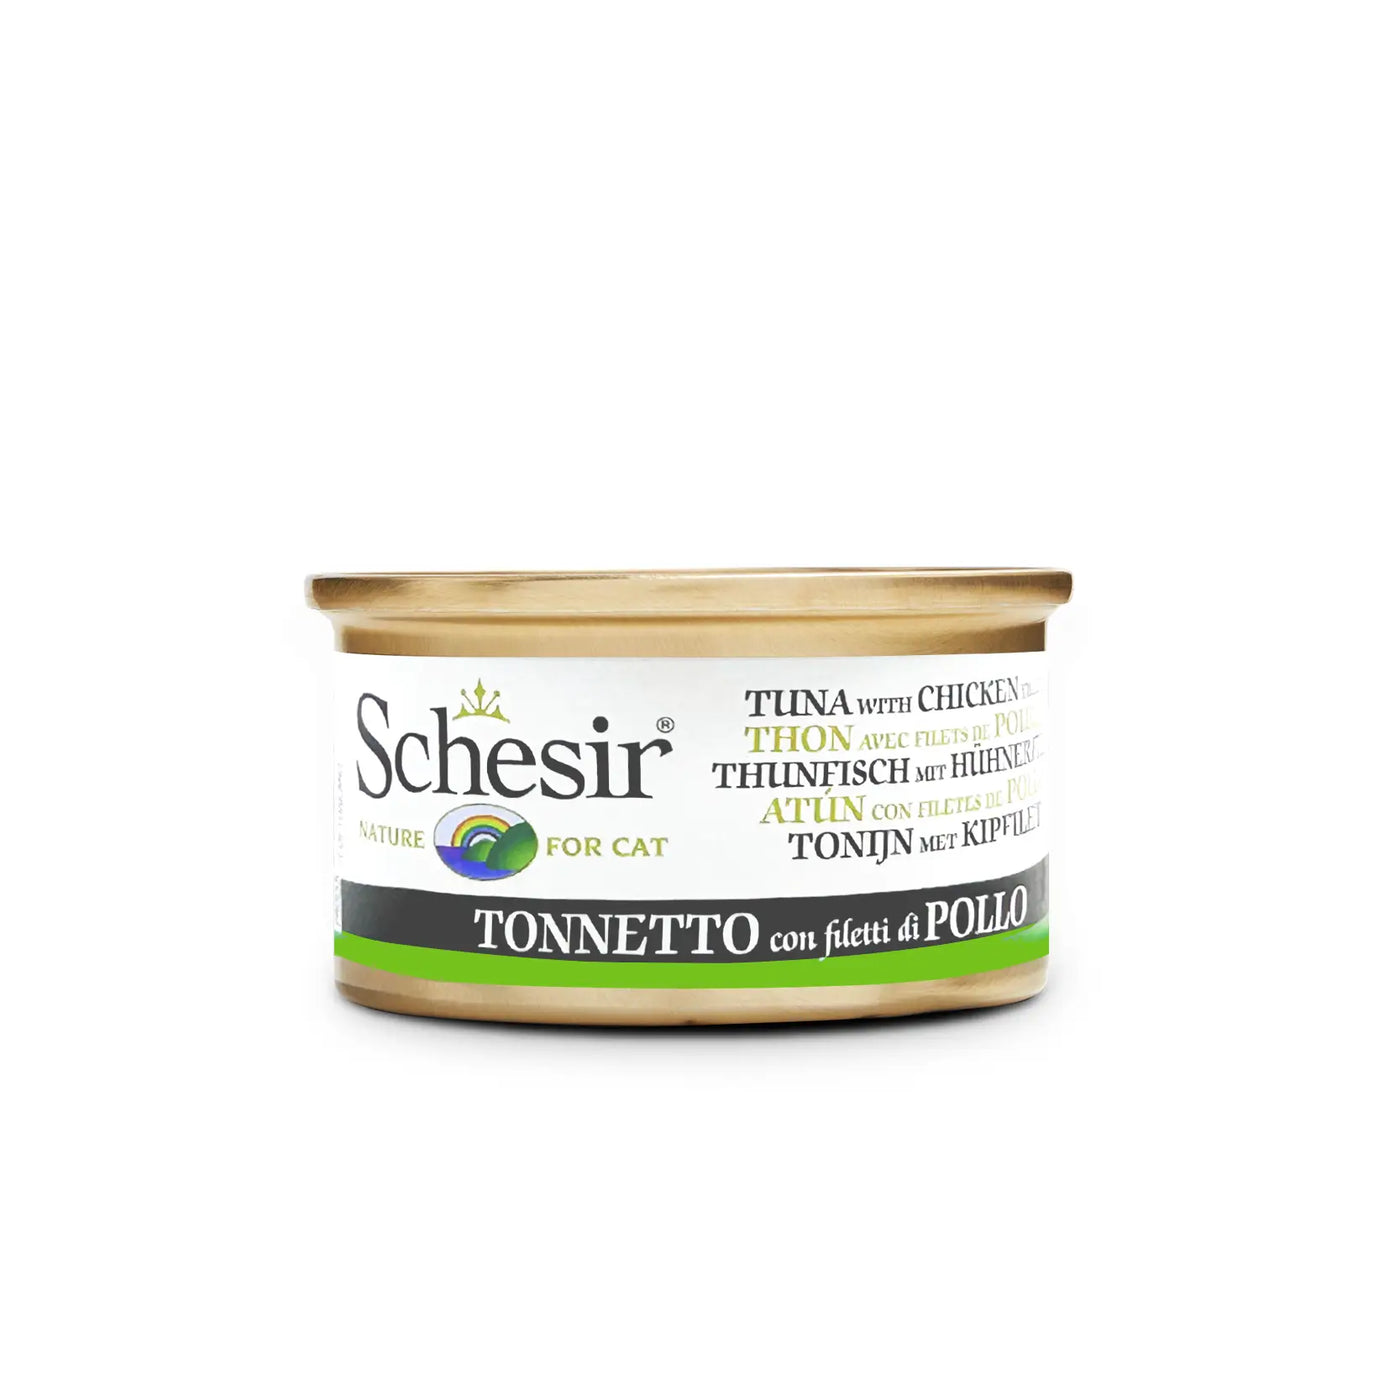 Schesir - Complementary Wet Food for Adult Cats - Tuna with Chicken 85g